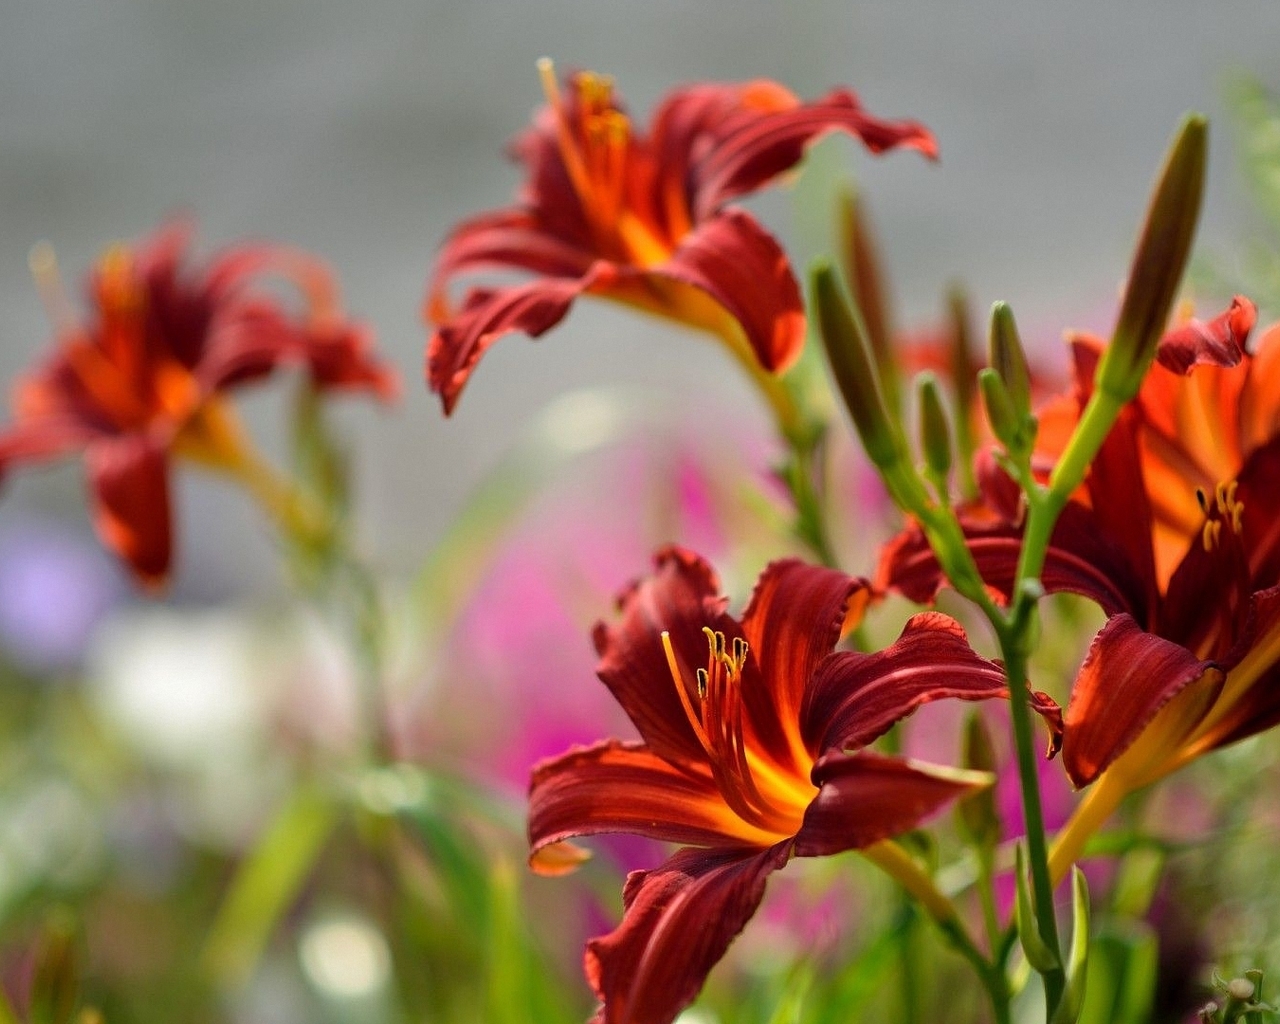 Image: Lily, flowers, bush, plant, red